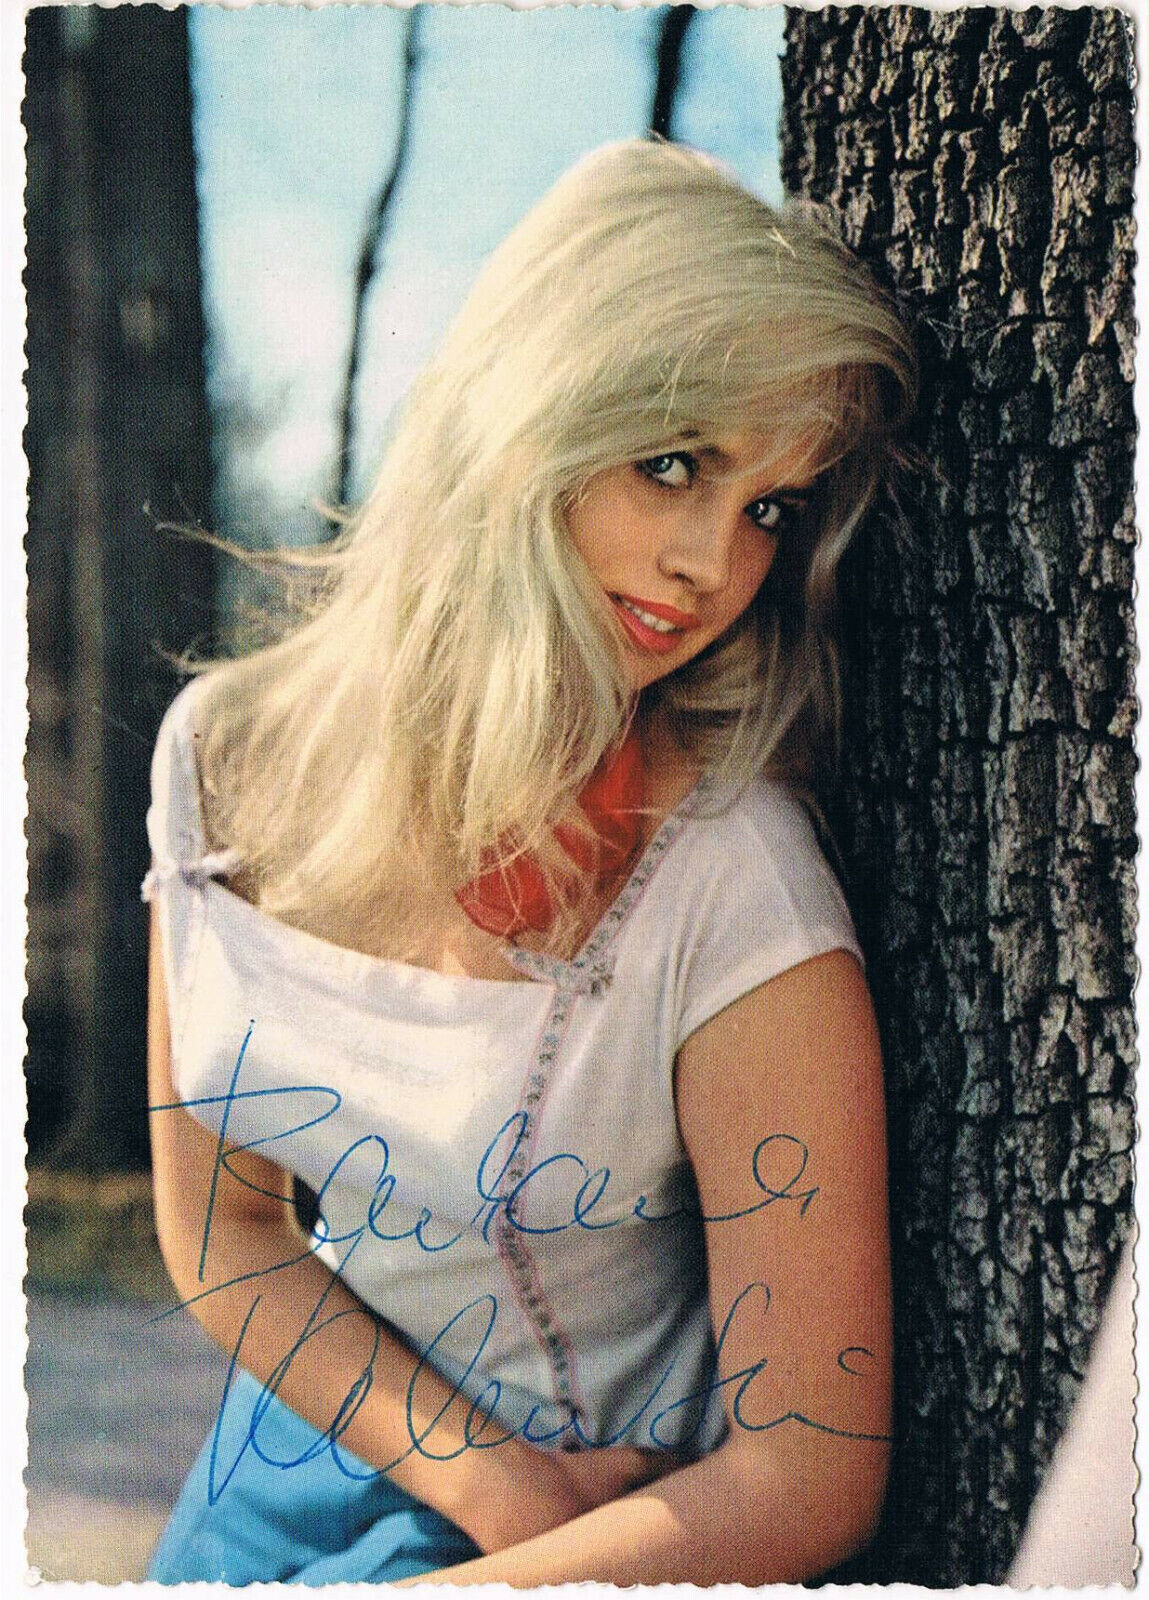 Barbara Valentin 1940-2002 autograph signed postcard Photo Poster painting 4x6